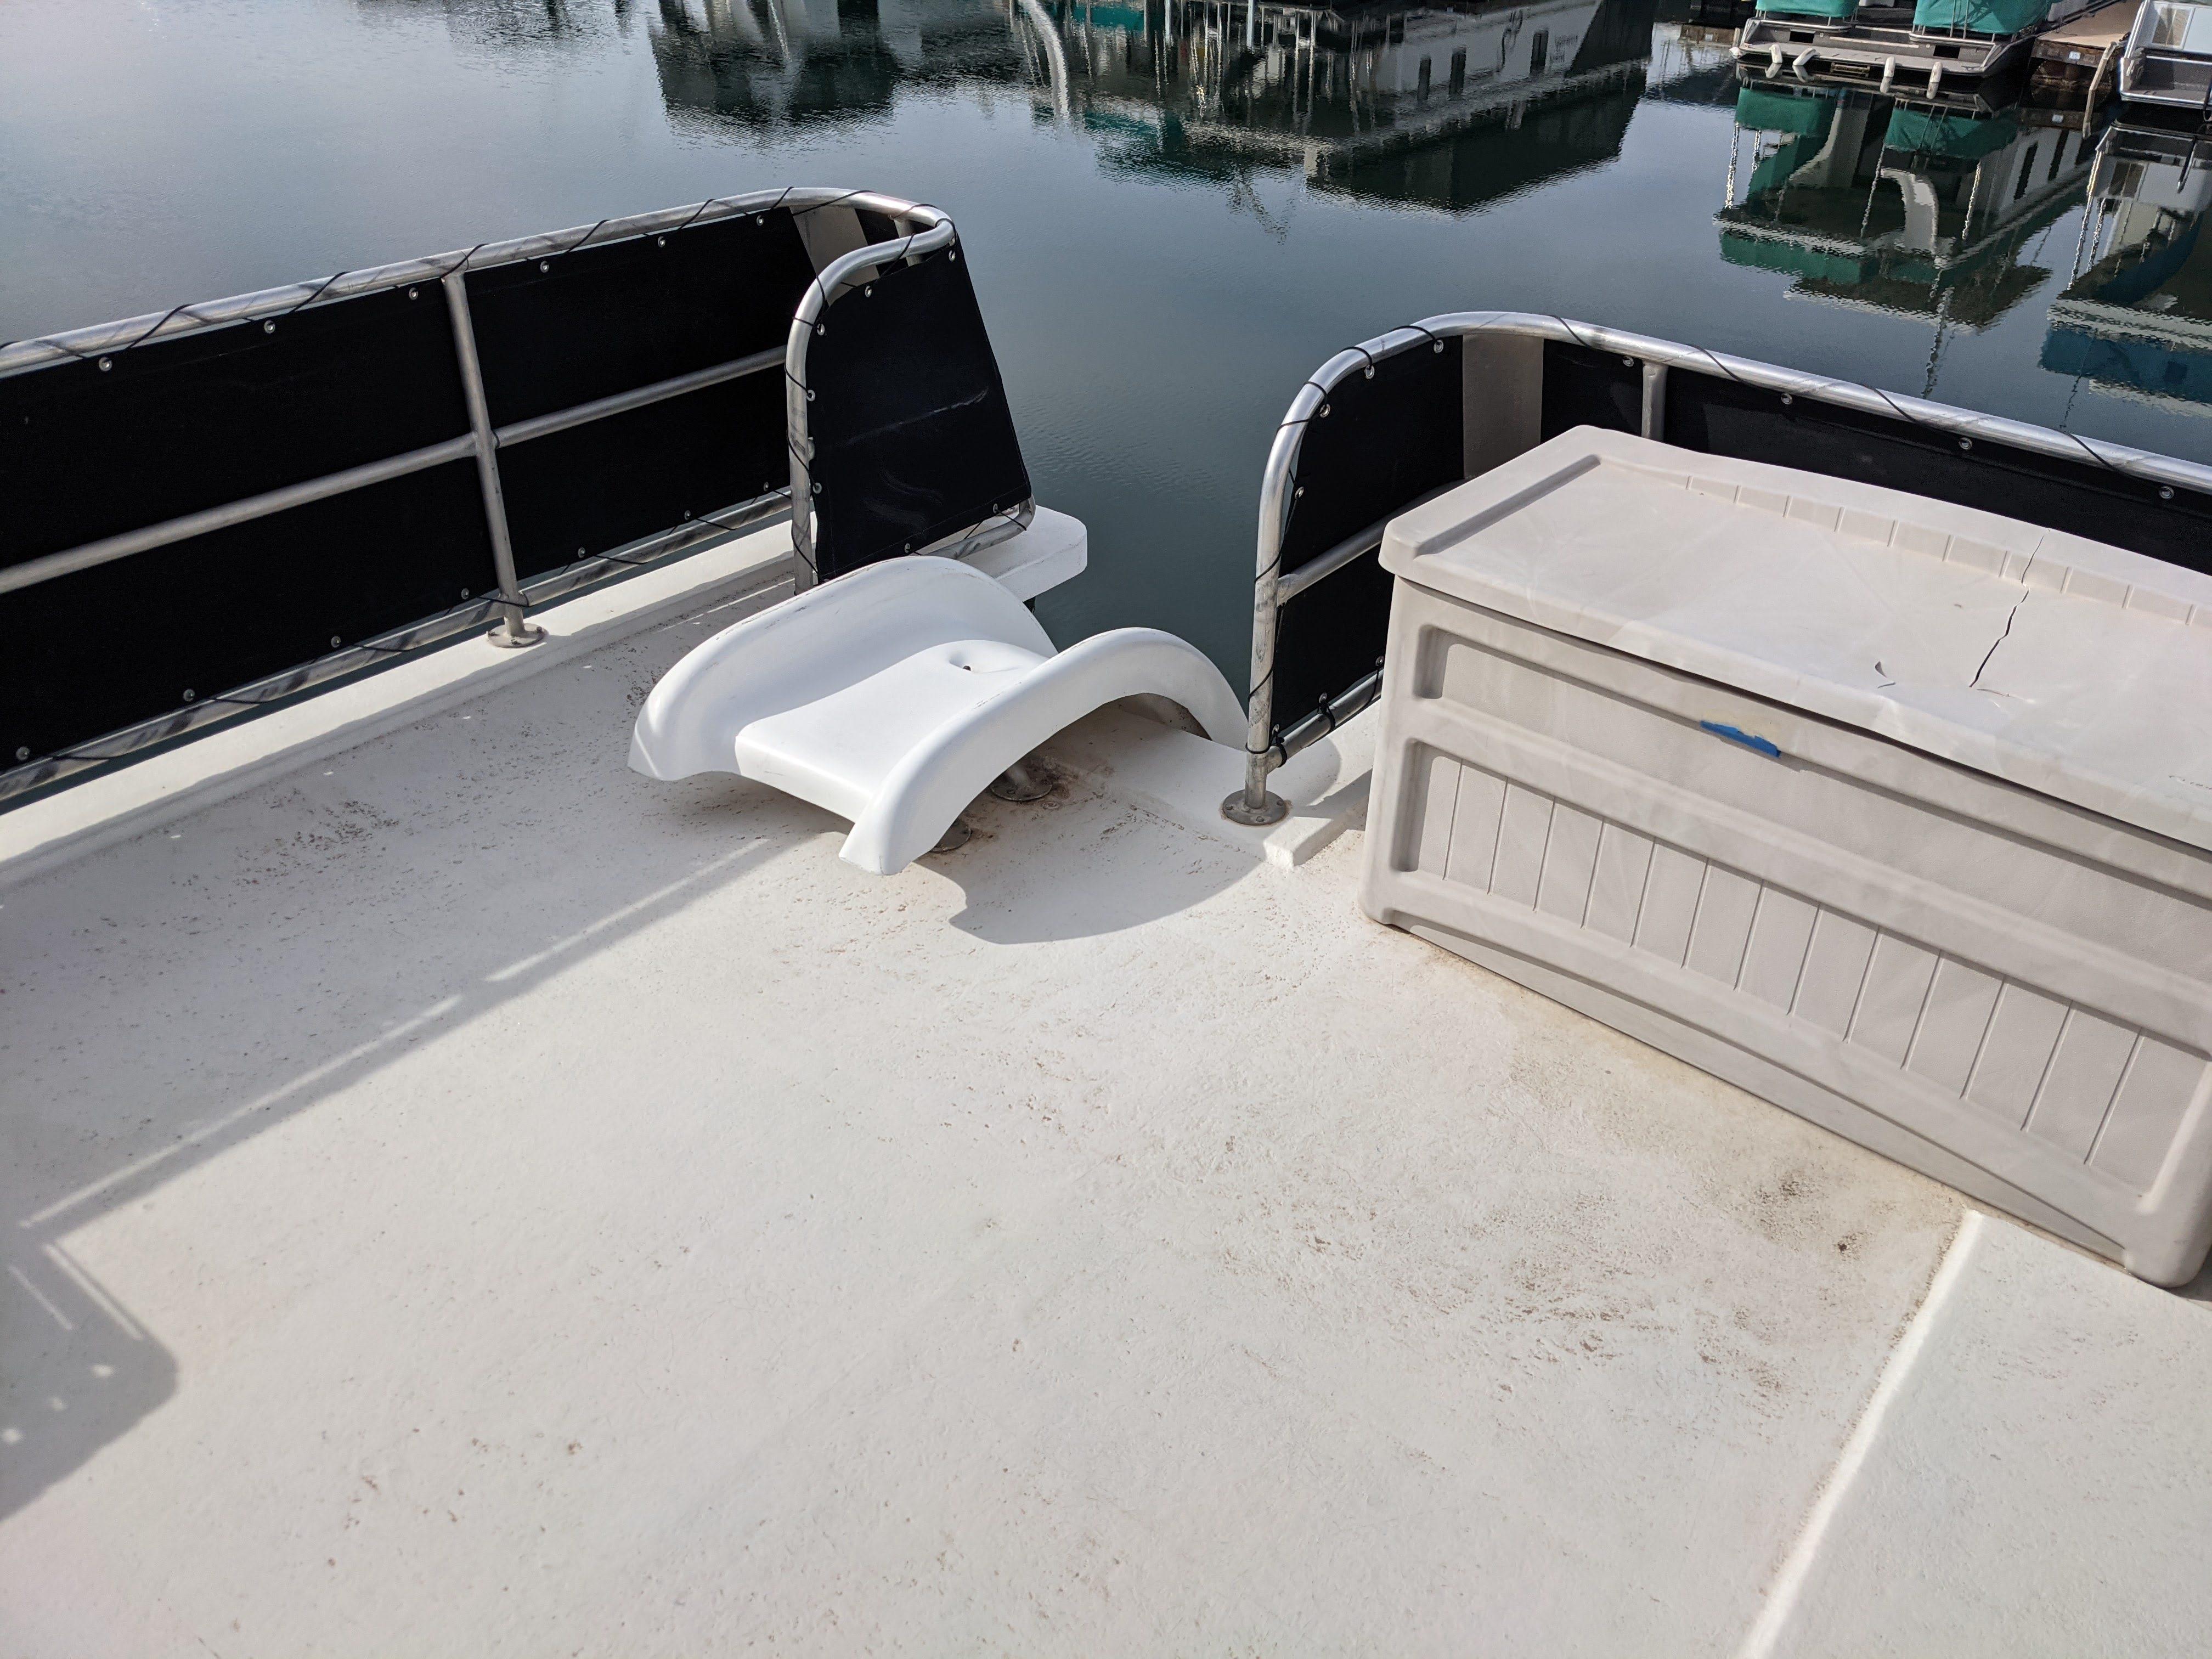 1993 Lakeview Multi Owner Houseboat